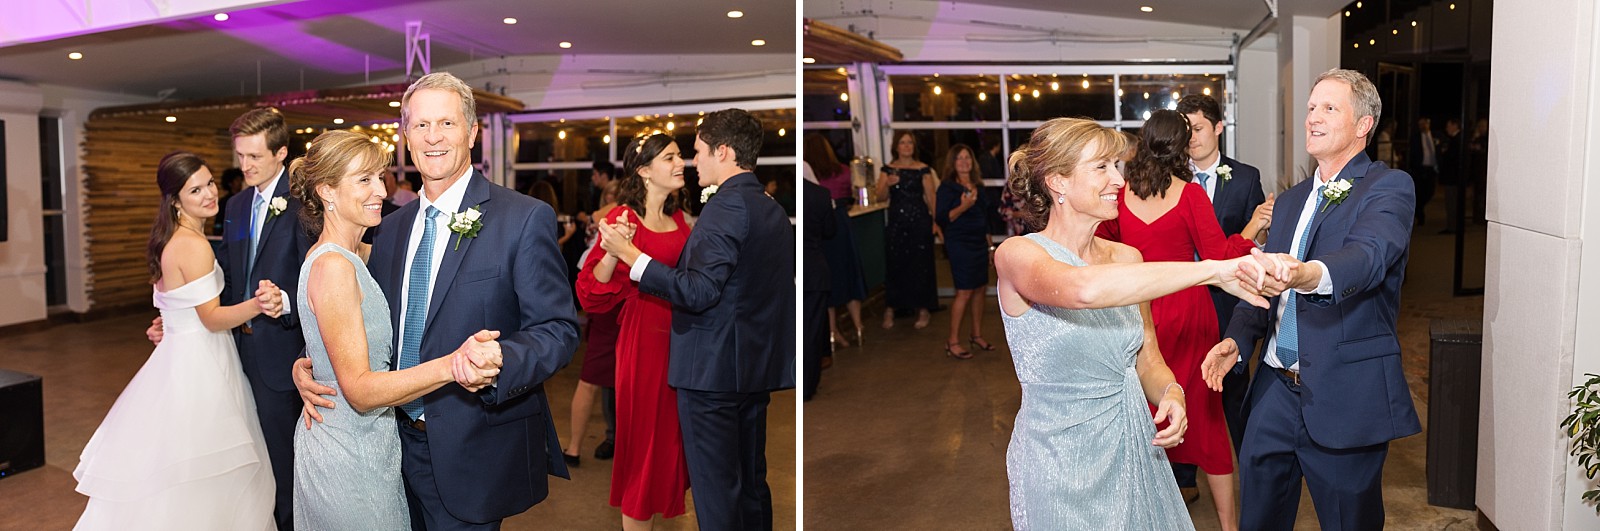 parents of the groom dancing  | The Meadows in Raleigh | Raleigh NC Wedding Photographer